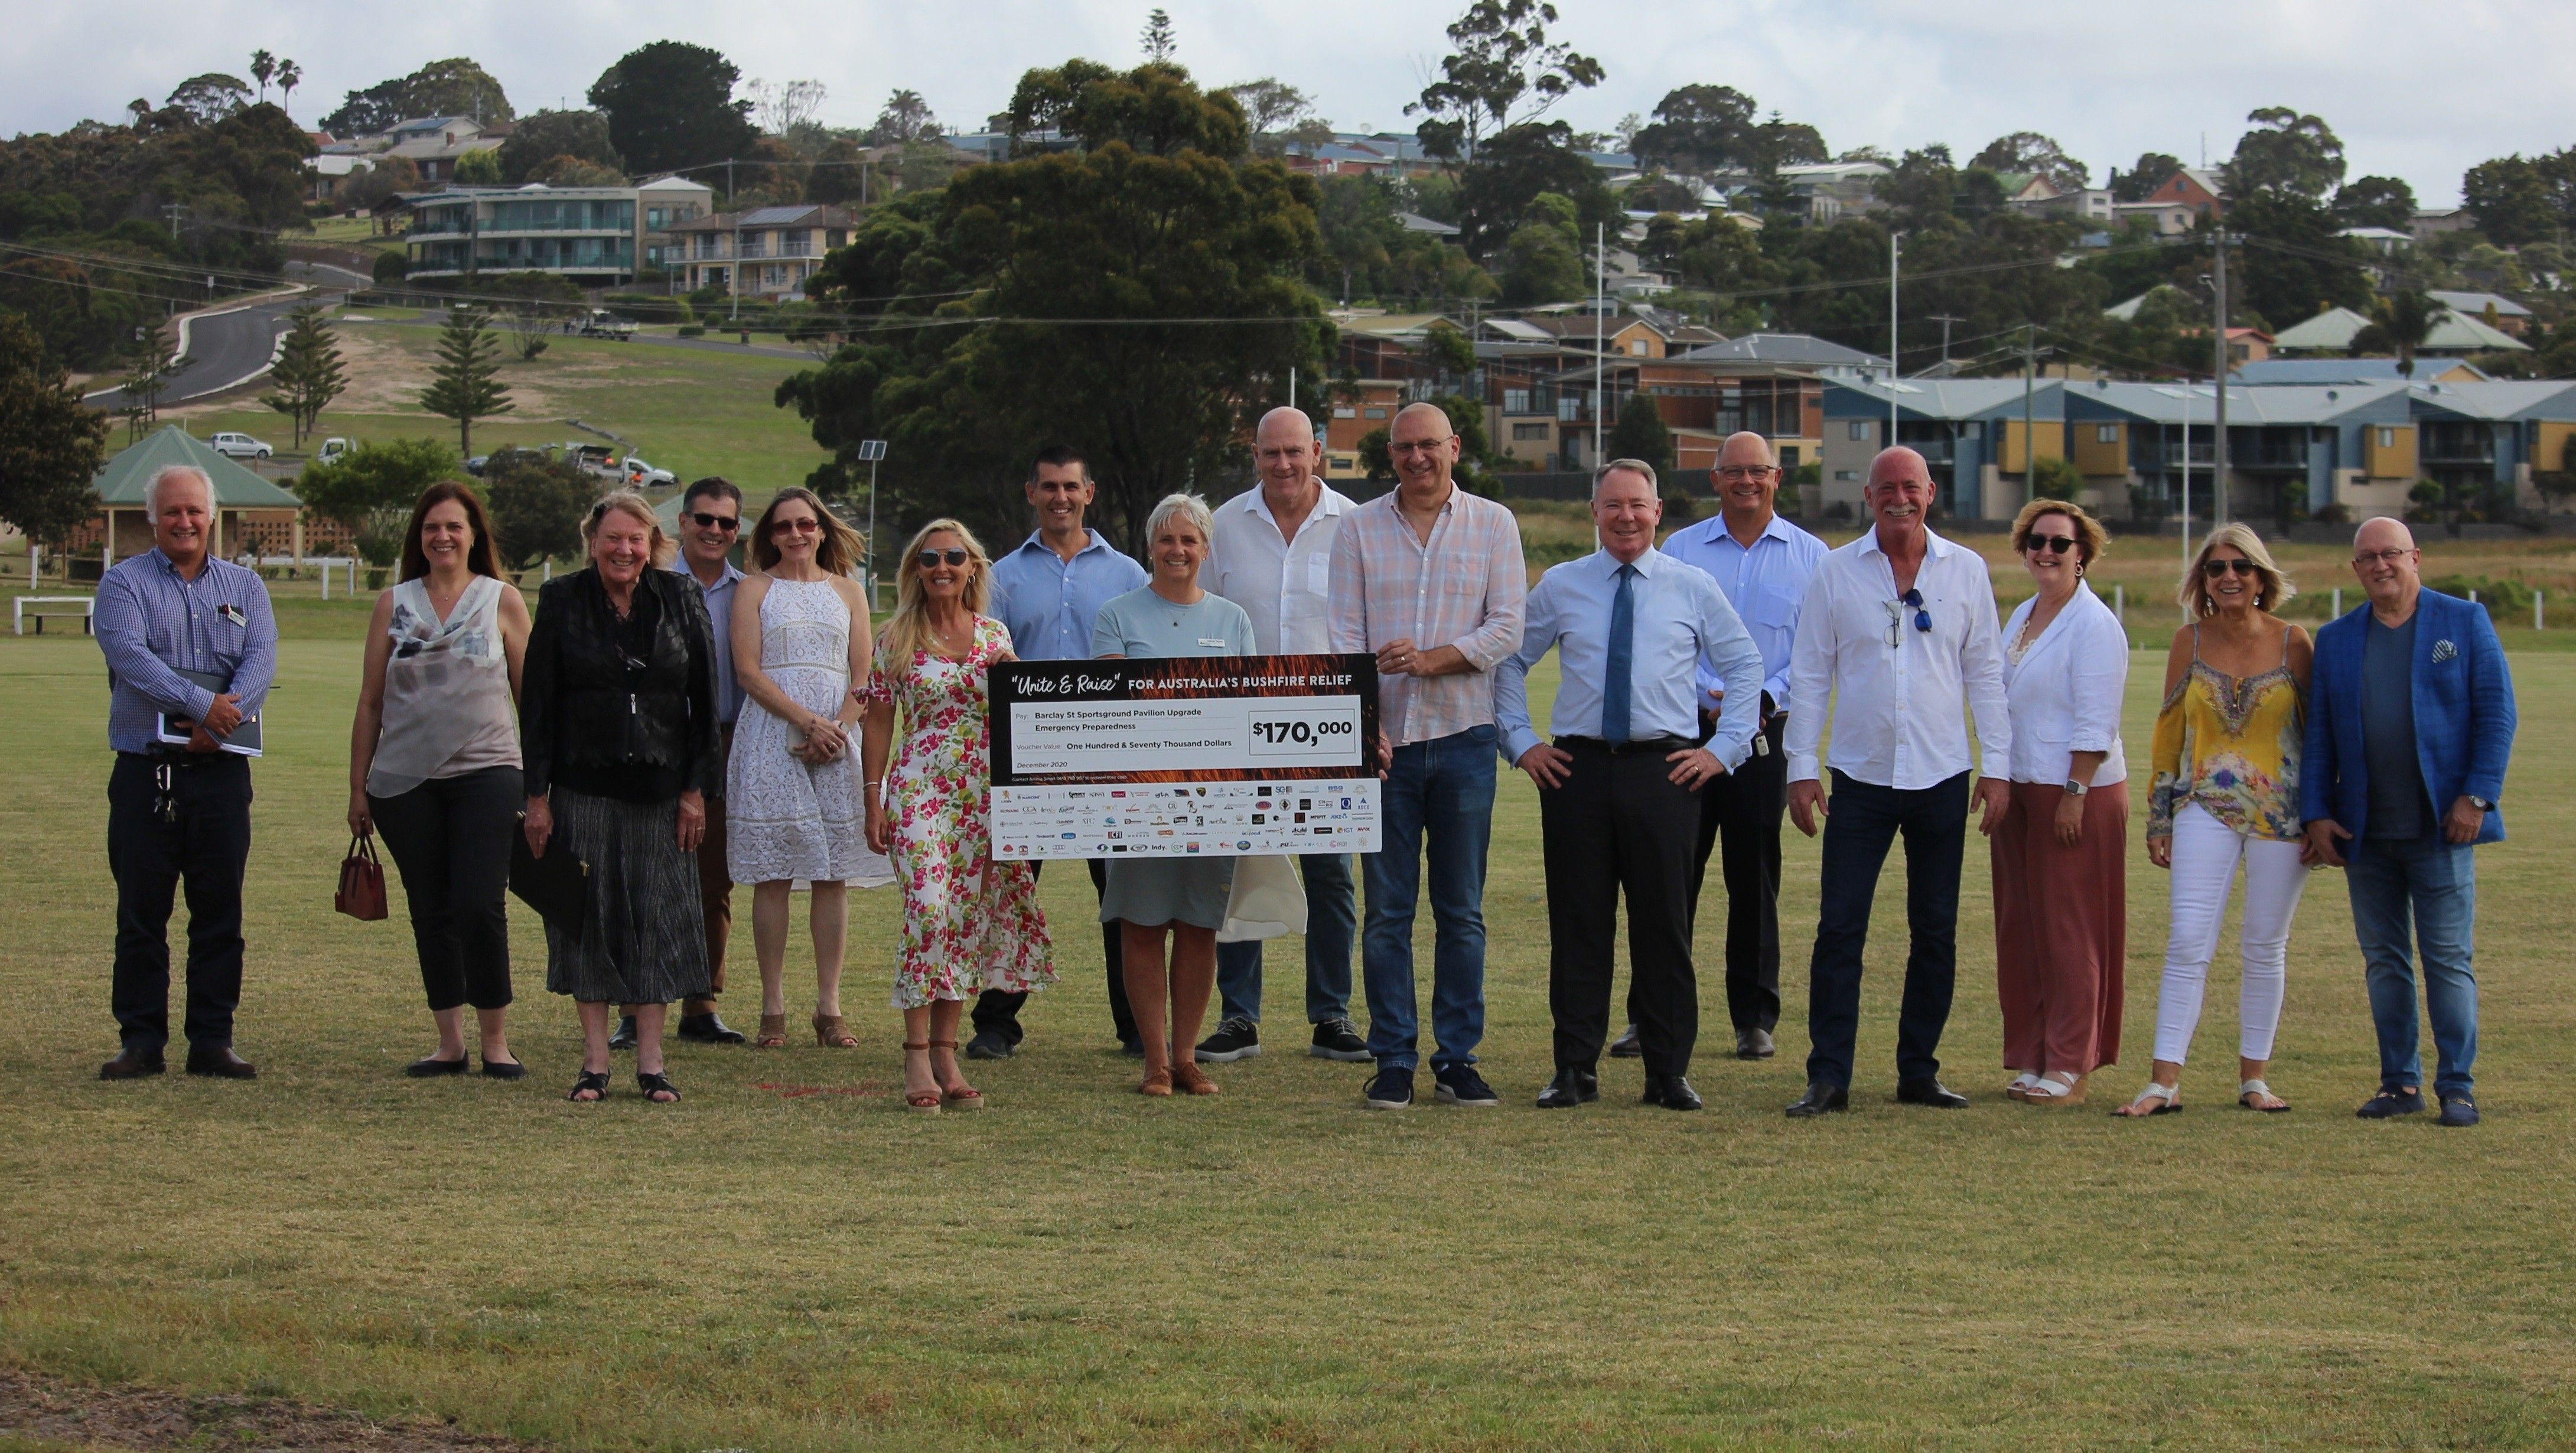 Generous donation from NSW clubs and businesses to help fund revitalised Barclay Street in Eden